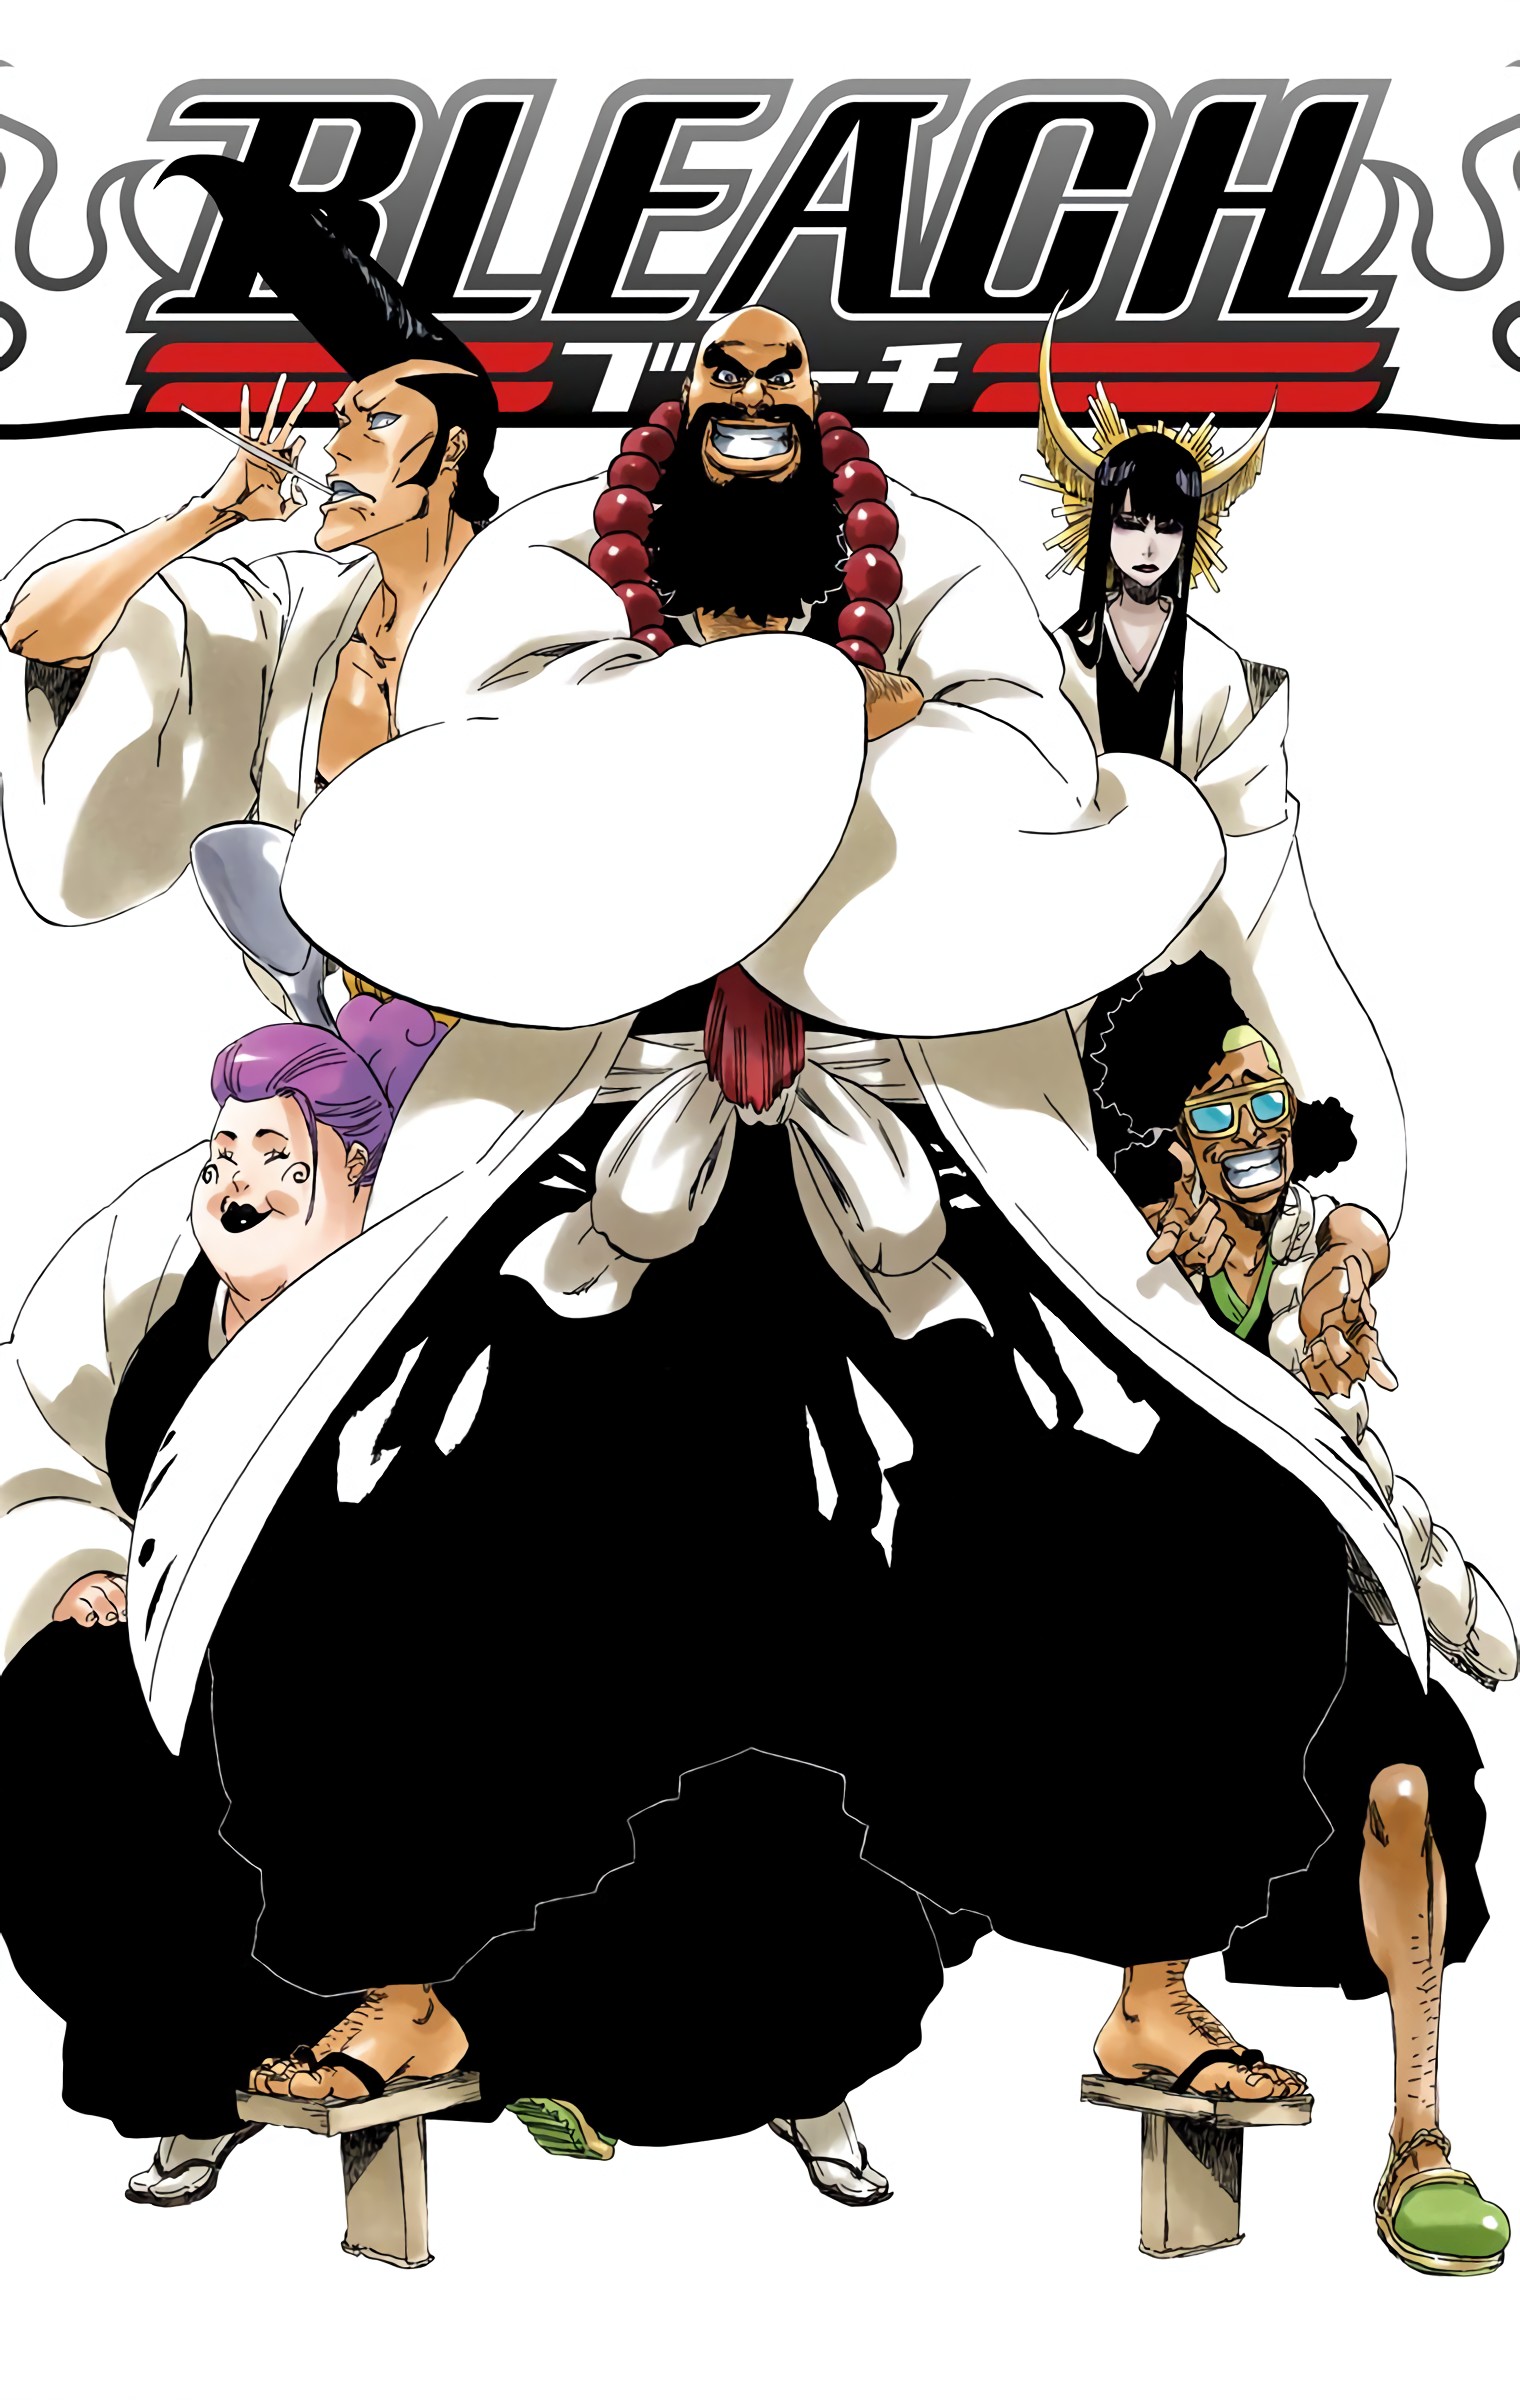 Daily BLEACH Scans on X: BLEACH creator Tite Kubo confirmed that